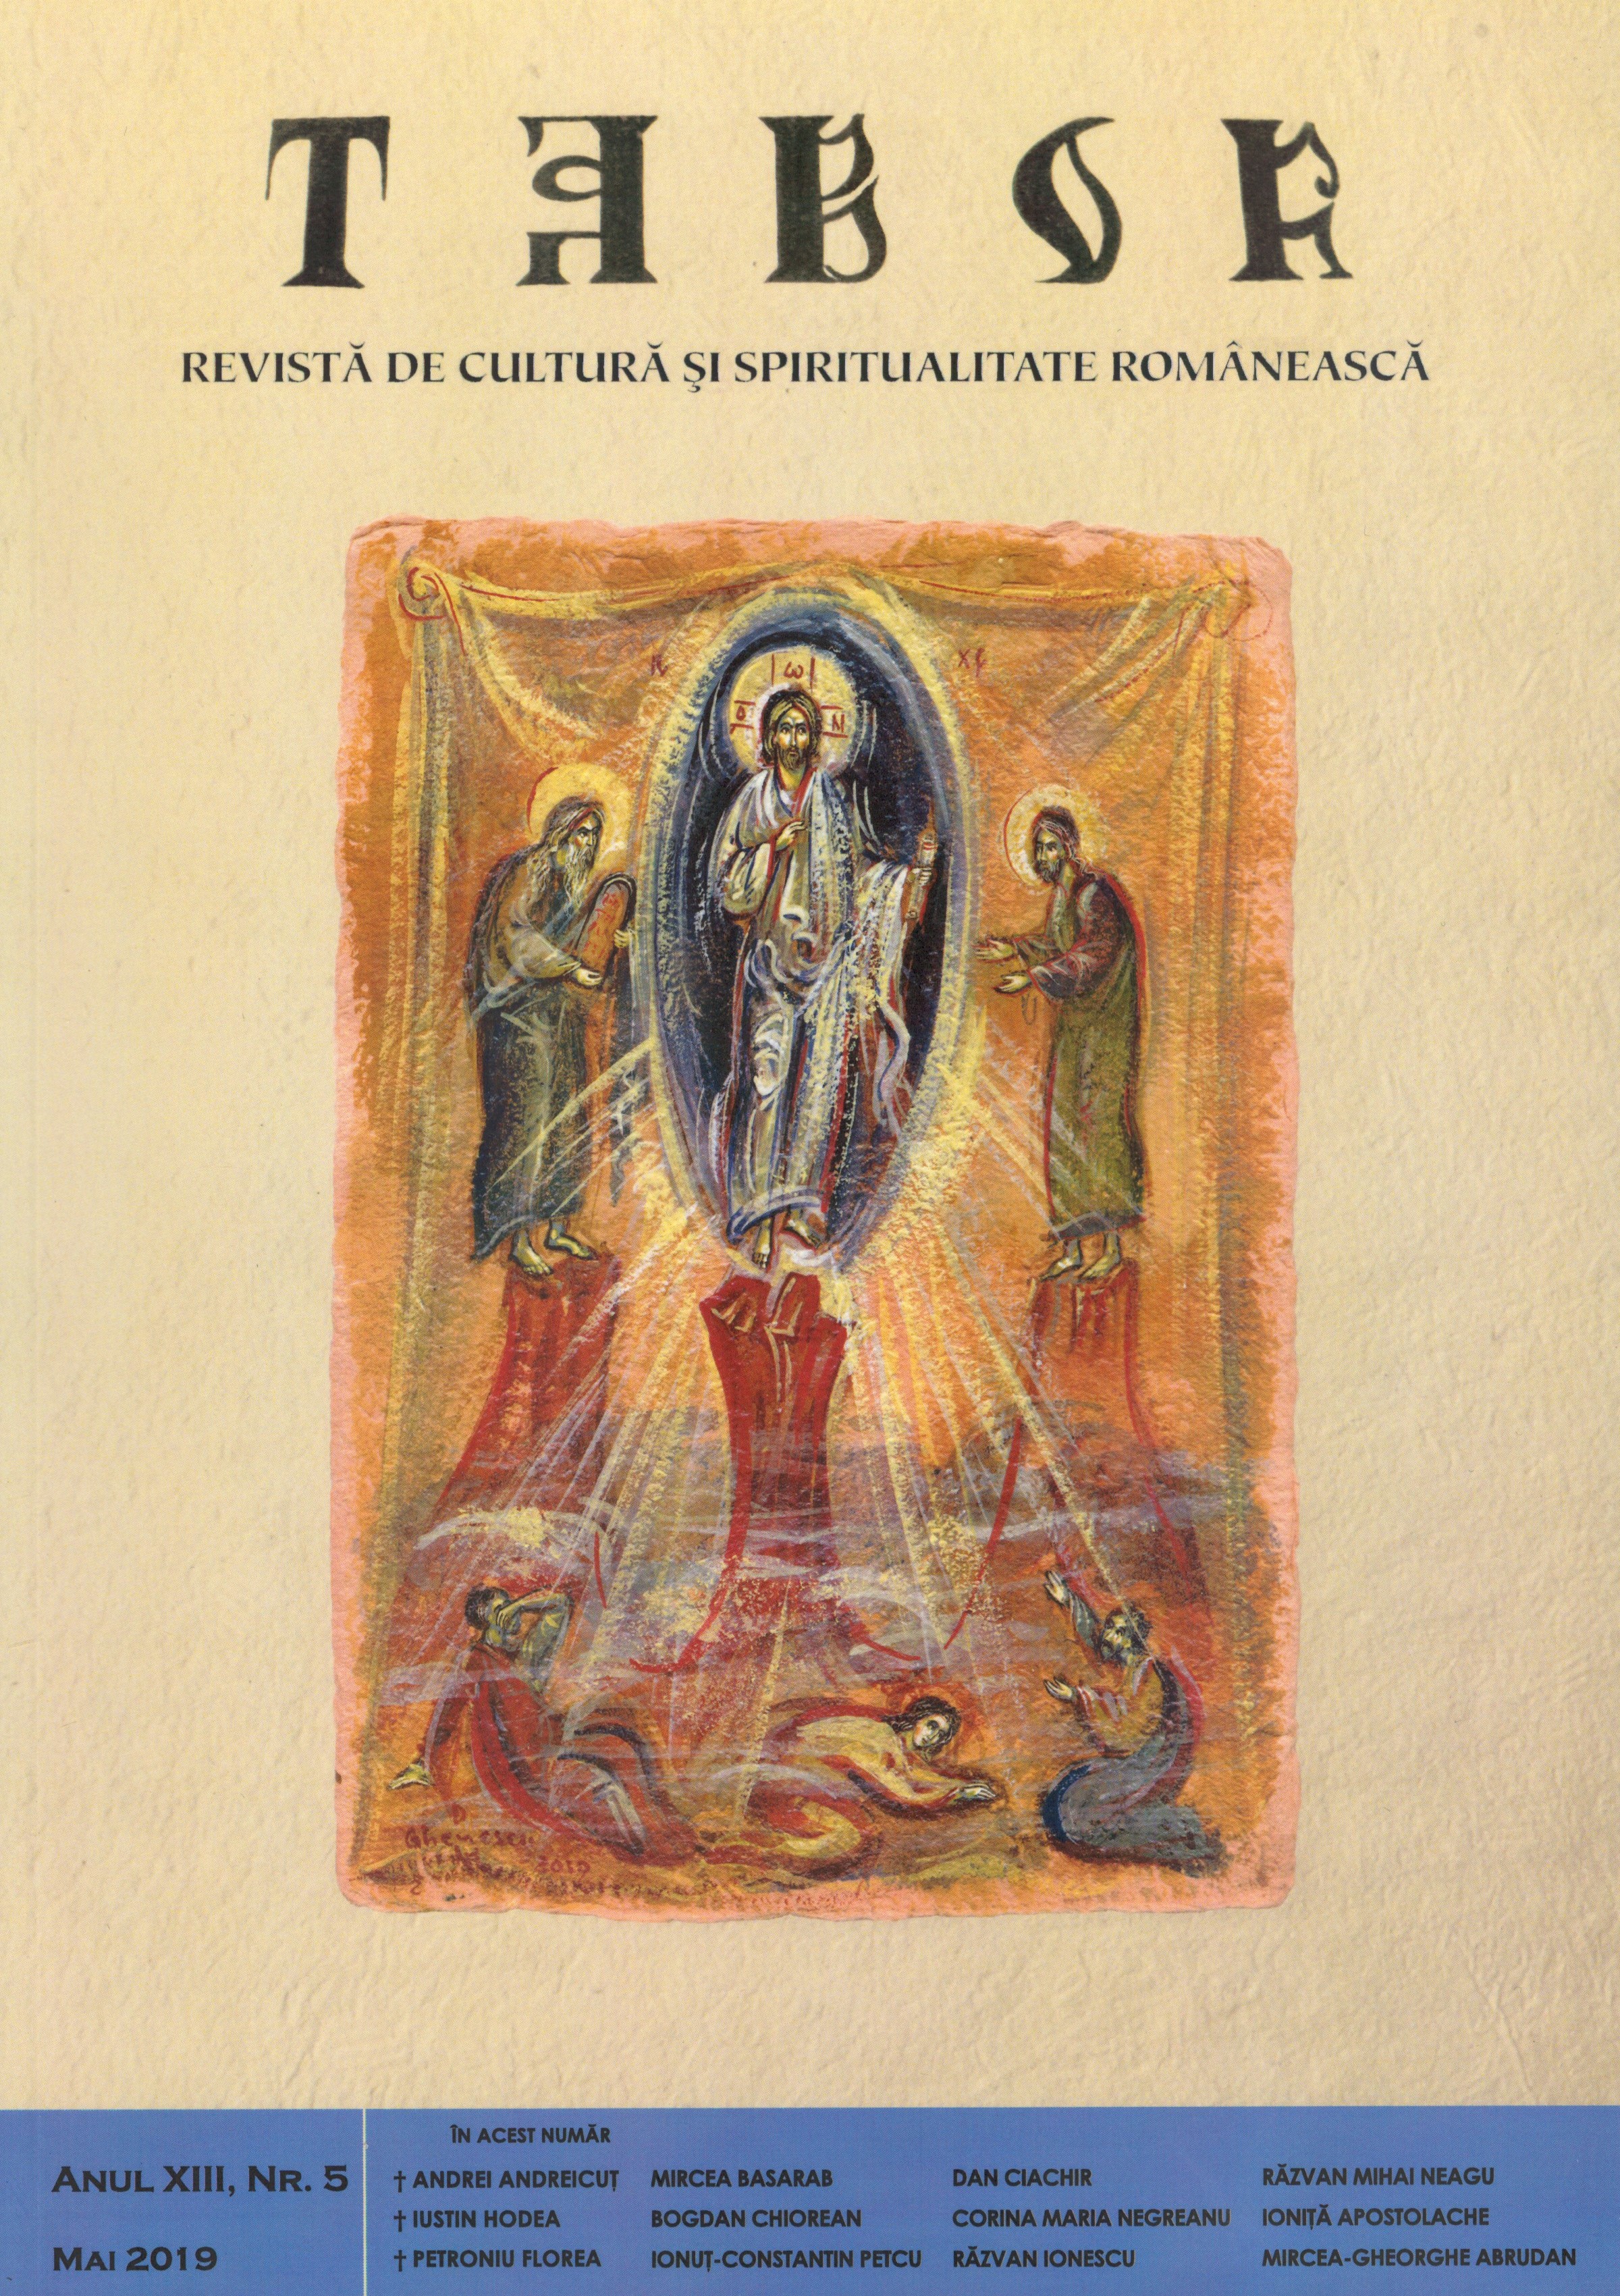 “Resurrection of Christ, restoration, renewal and enlightenment of the world” Cover Image